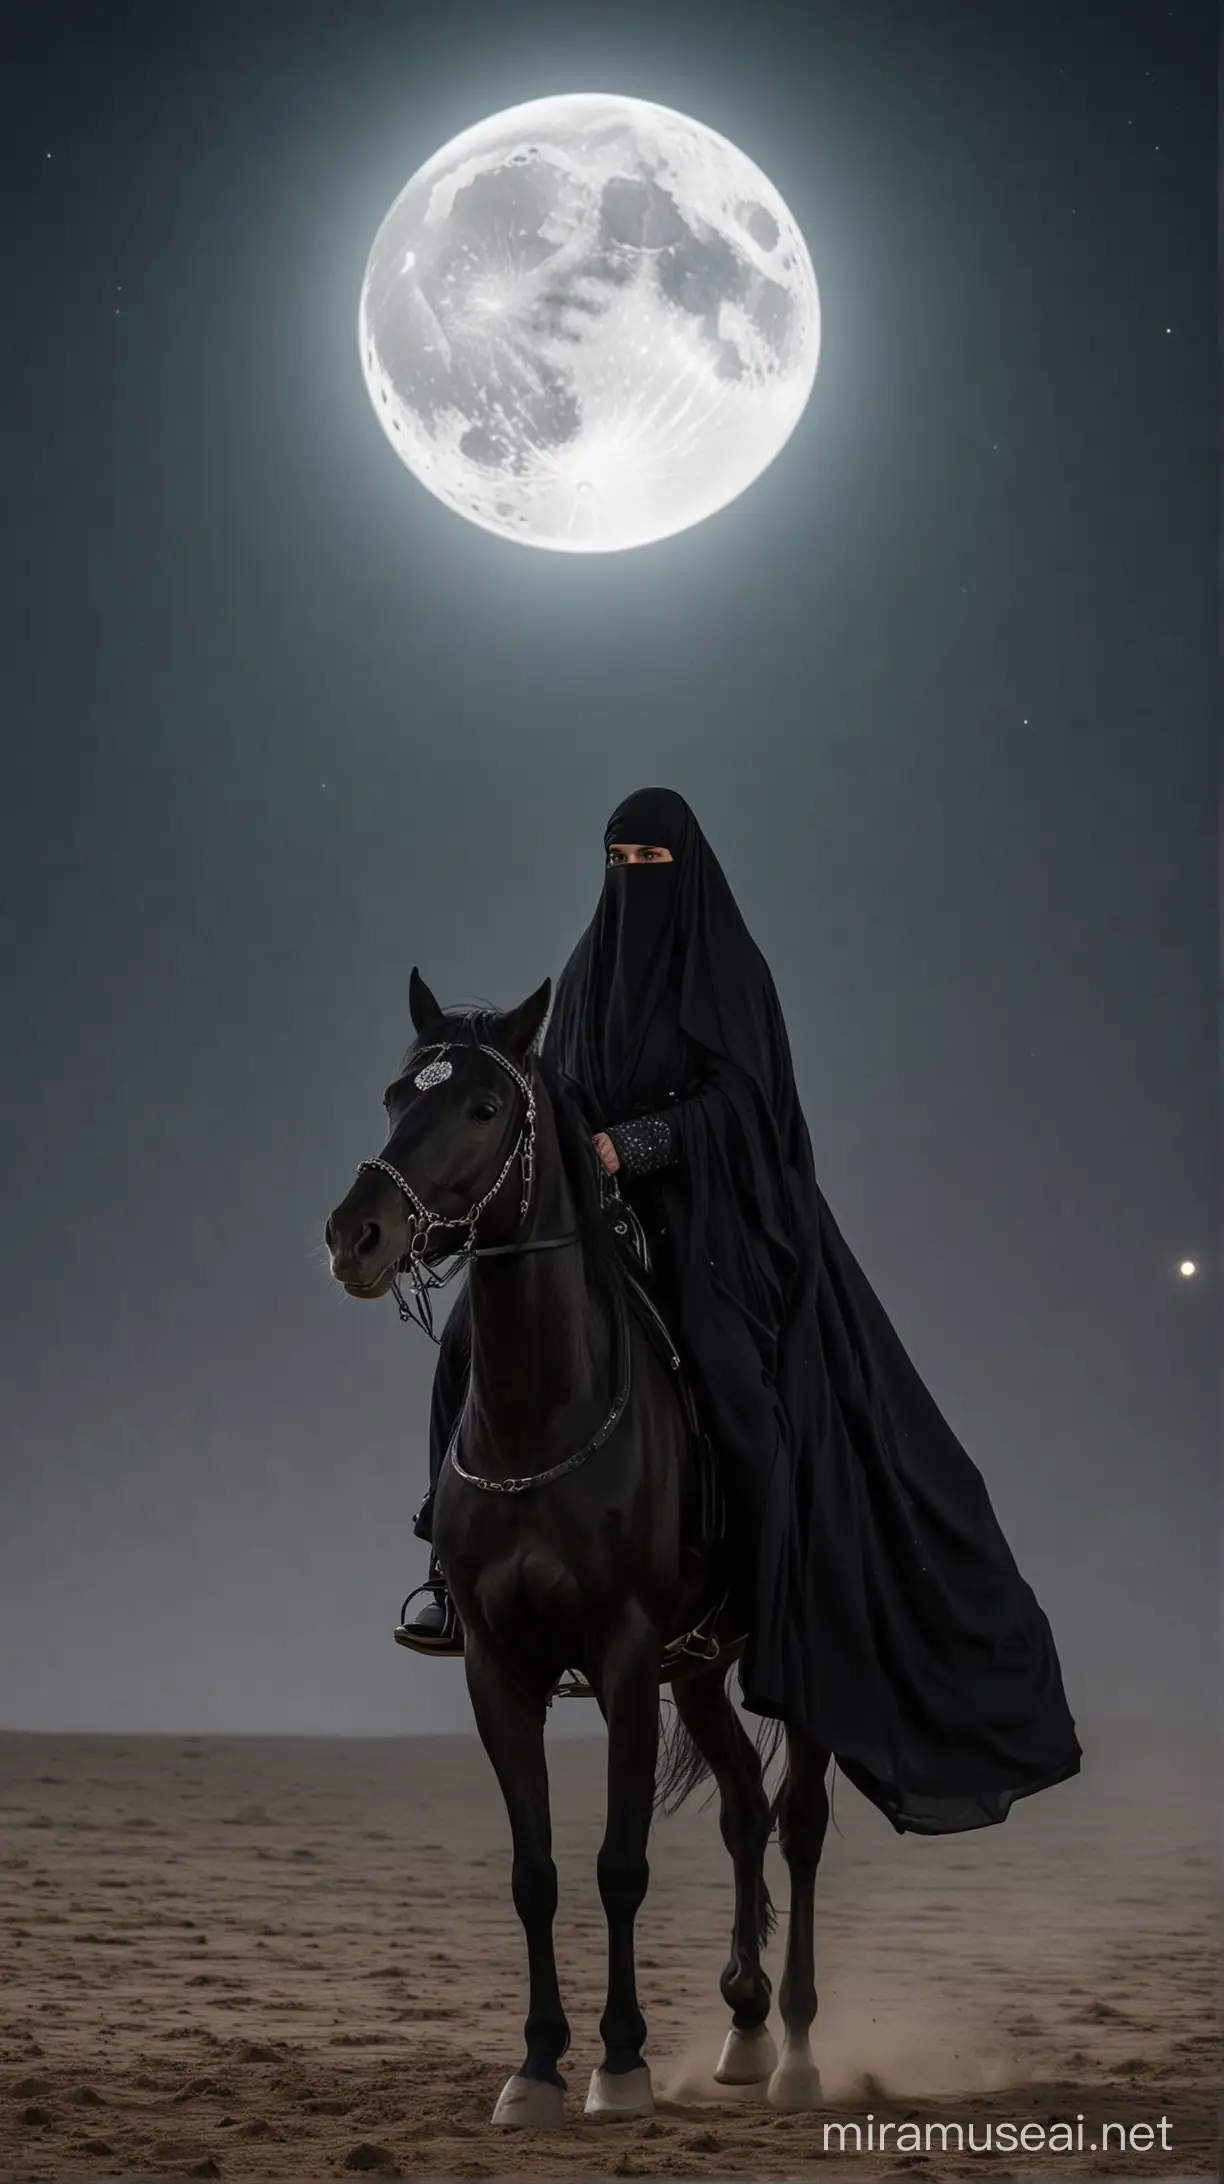 Mysterious Woman in Niqab Riding a Black Horse Under Moonlight